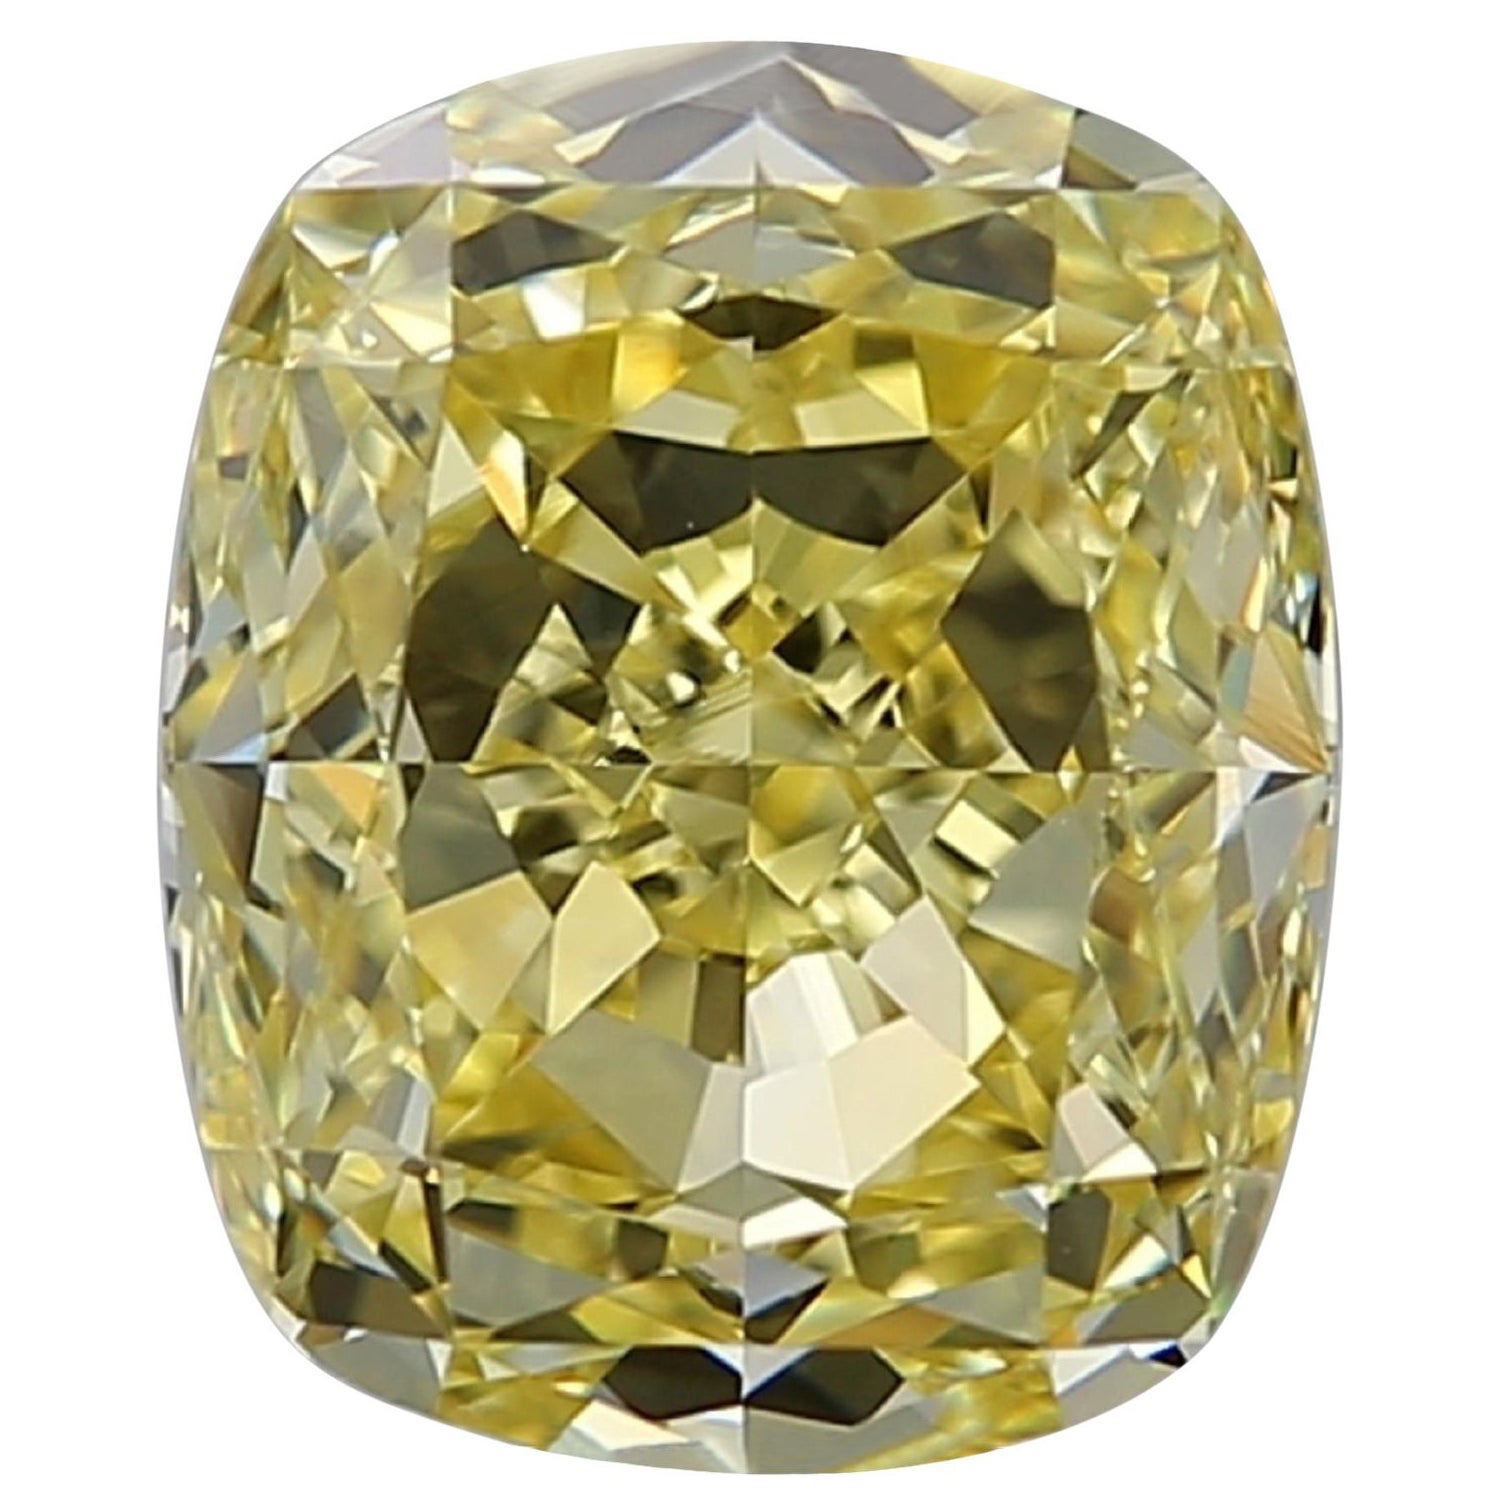 This exquisite ring features a stunning 5 ct Cushion Modified diamond that exudes a captivating Fancy Yellow color, creating a radiant centerpiece. Certified by the Gemological Institute of America (GIA), this diamond is distinguished by its VVS2